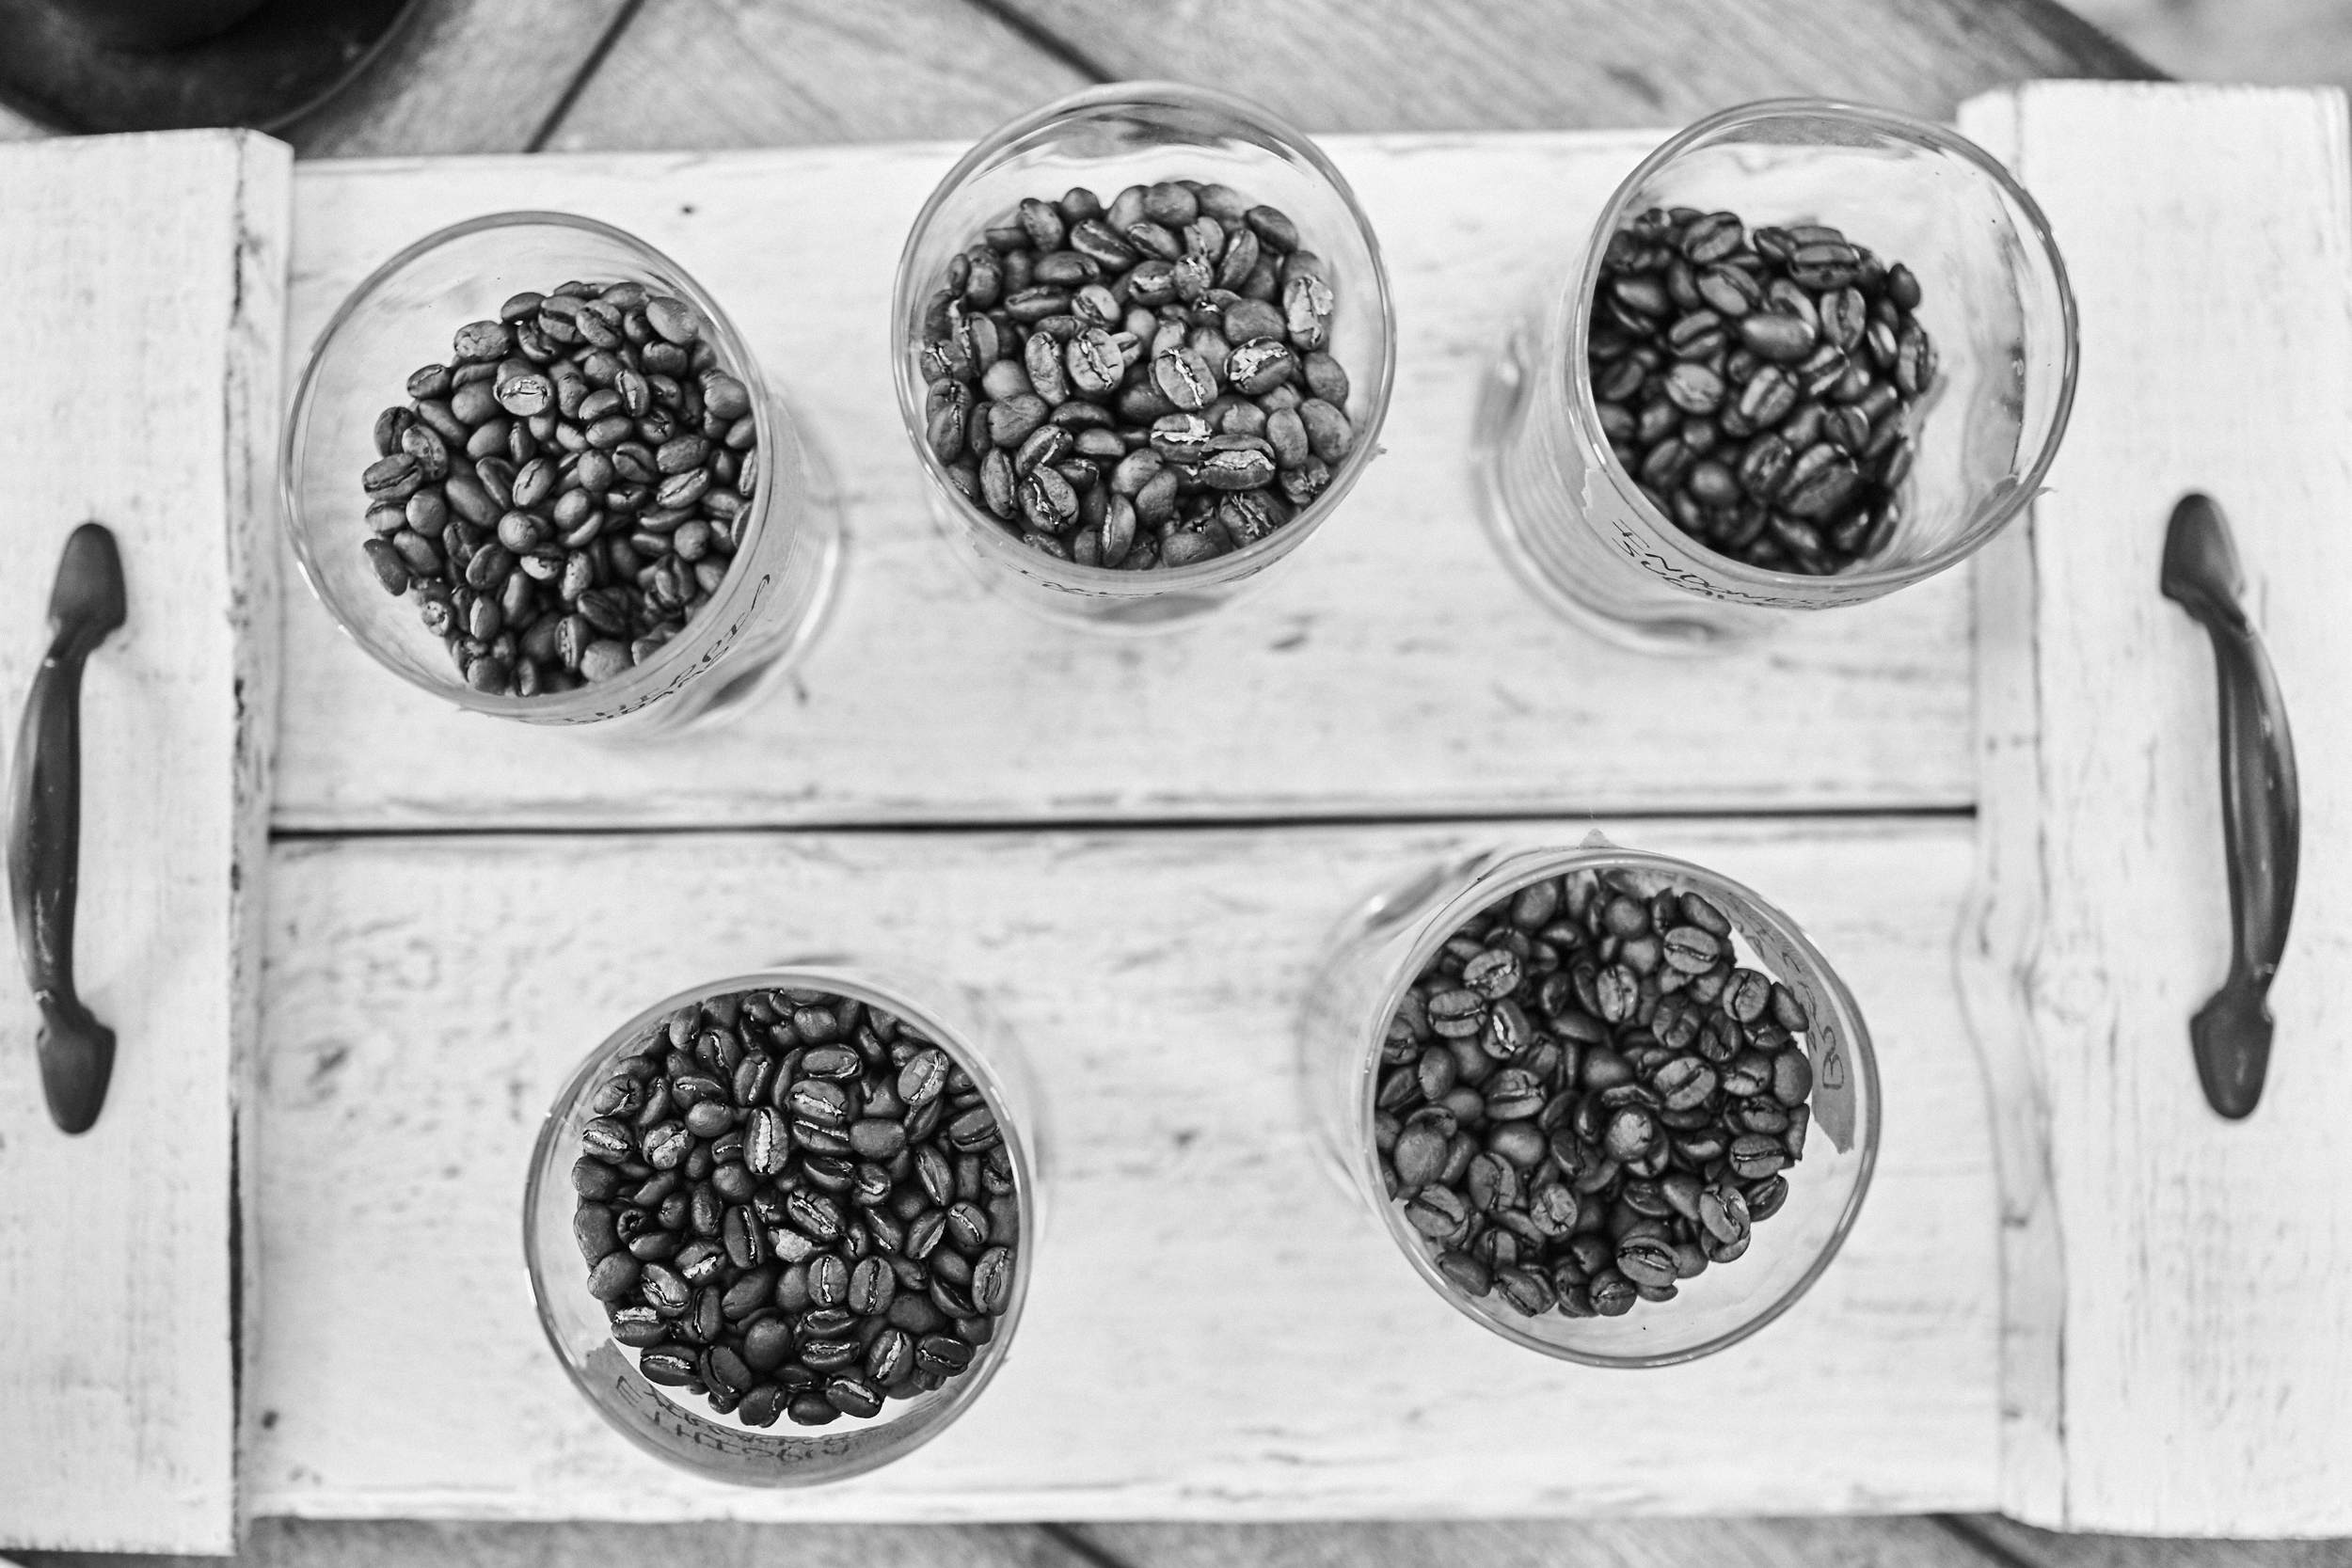 Informal Cupping (Image by Jeremy Allen)